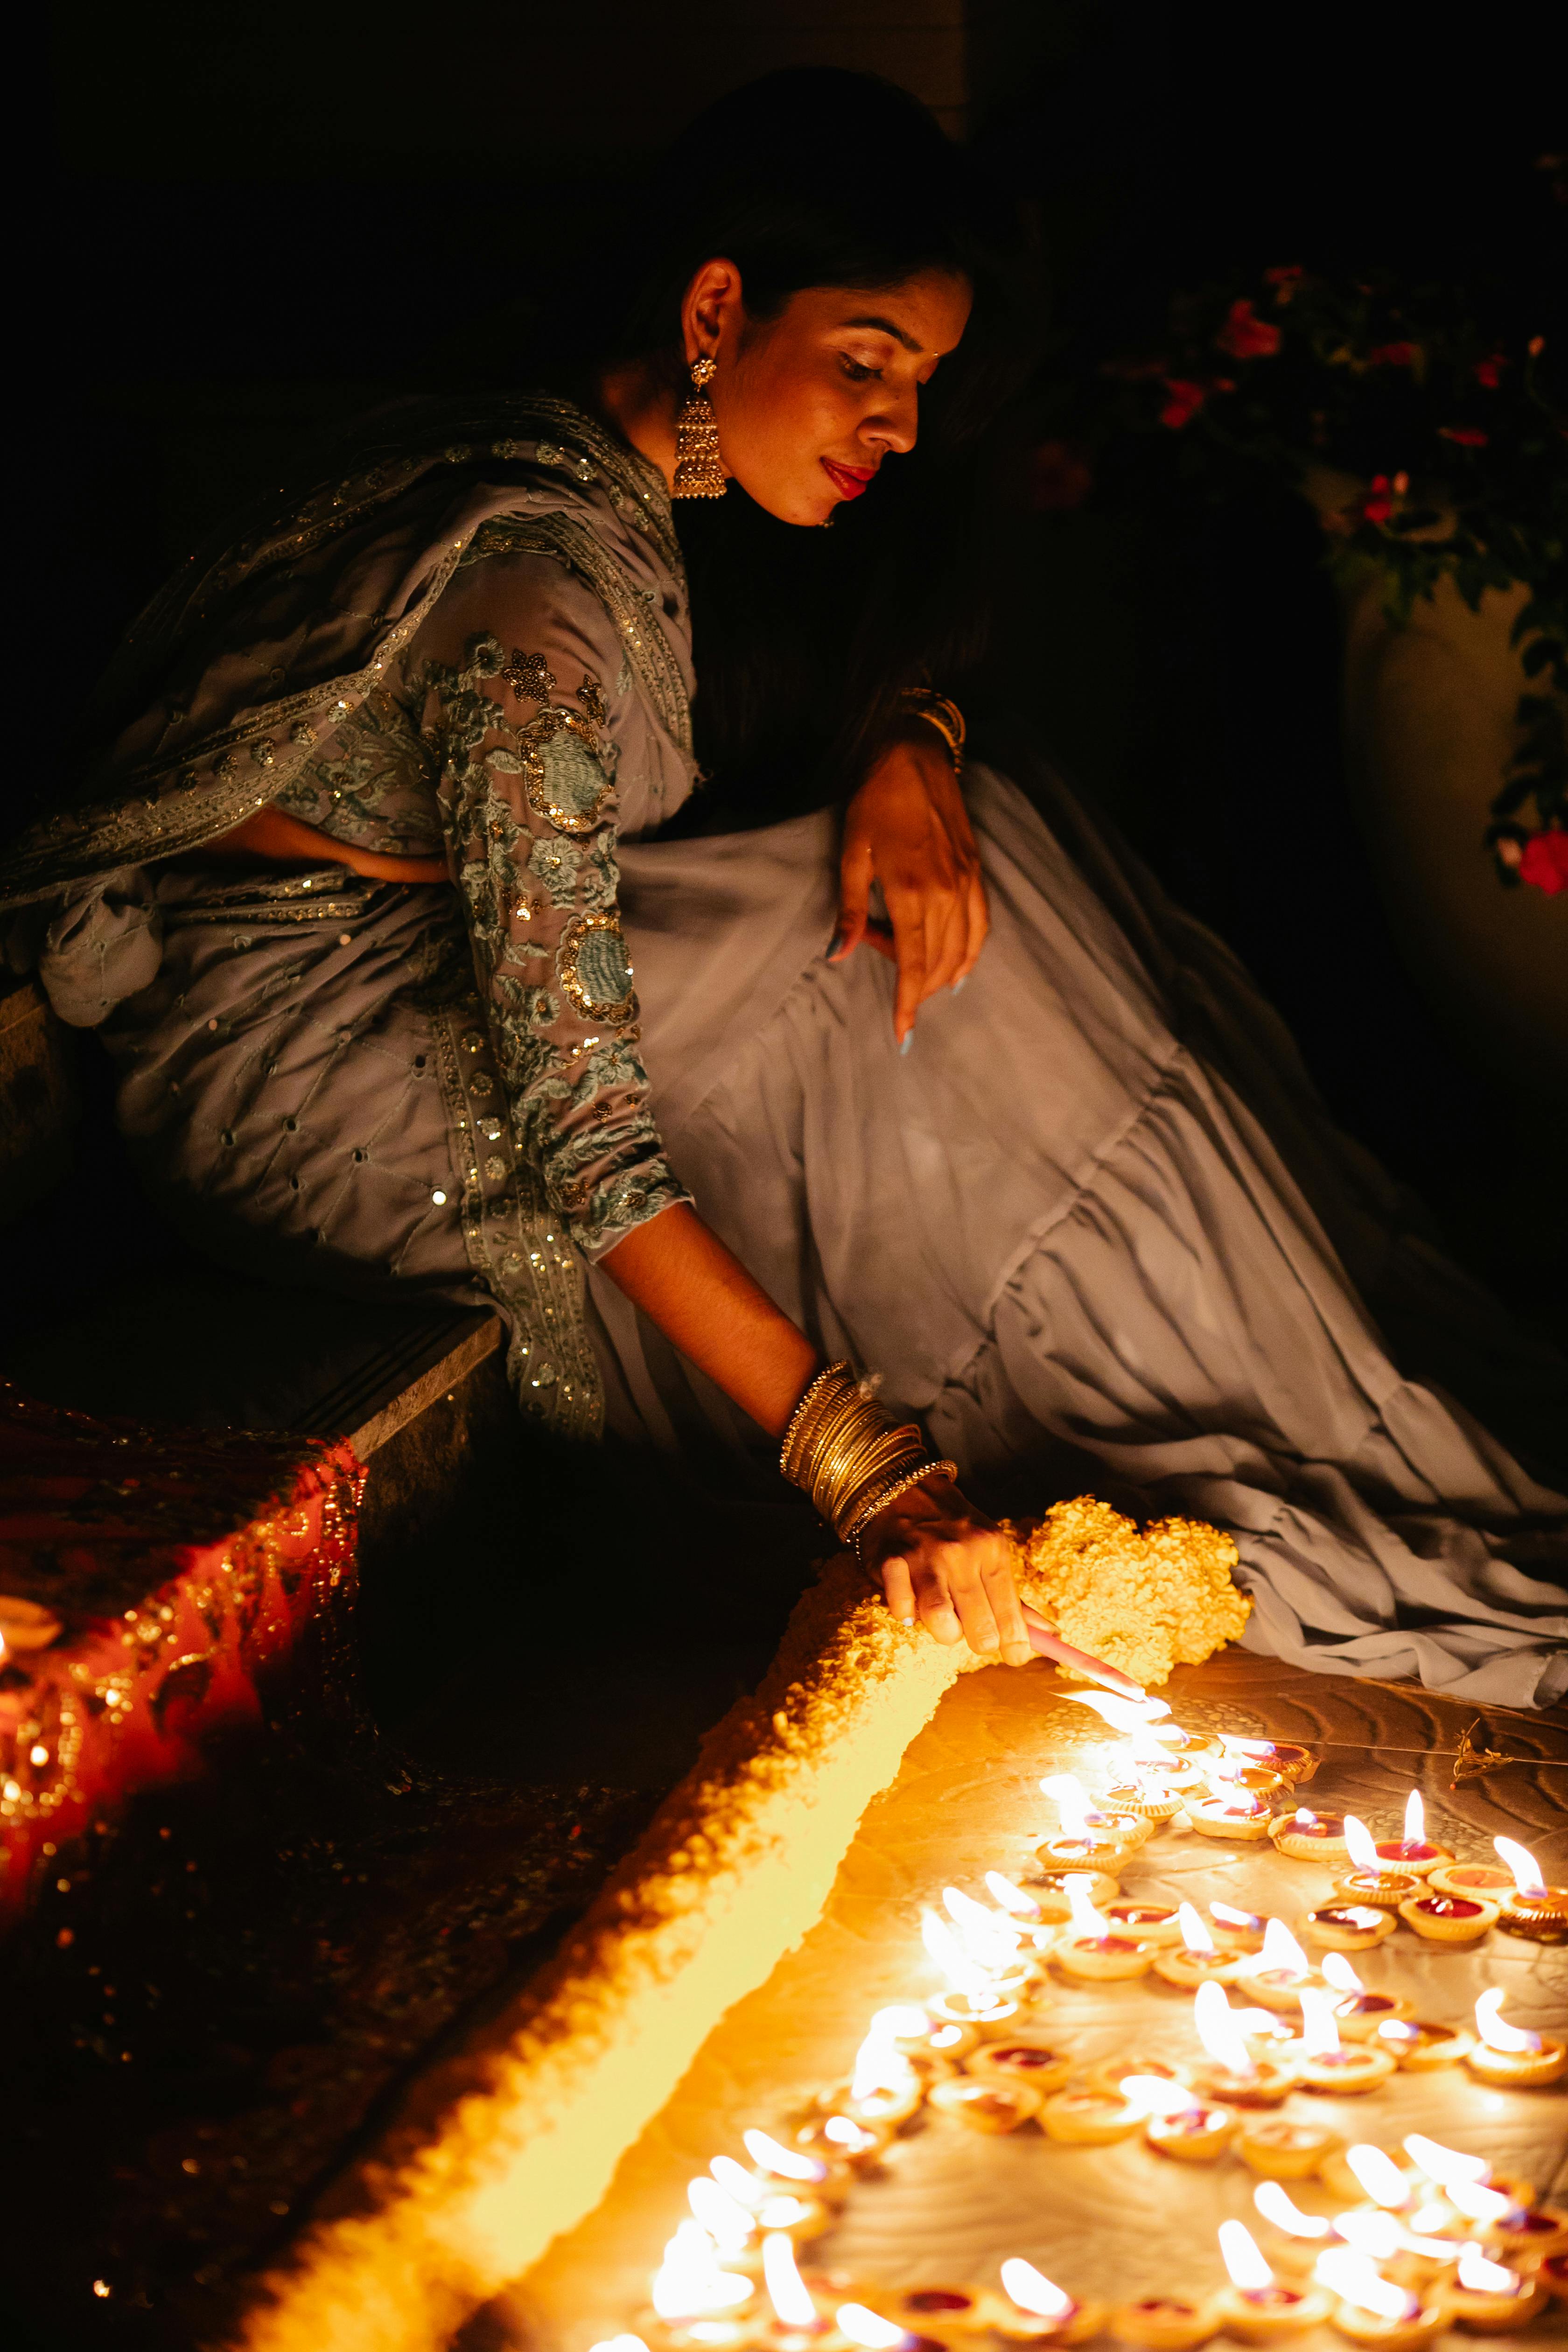 Free Photos - A Beautiful Indian Woman Wearing Traditional Jewelry And A  Blue Dress, Sitting In Front Of A Backdrop Of Lit Candles. Her Mesmerizing  Smile And The Soft Glow Of The